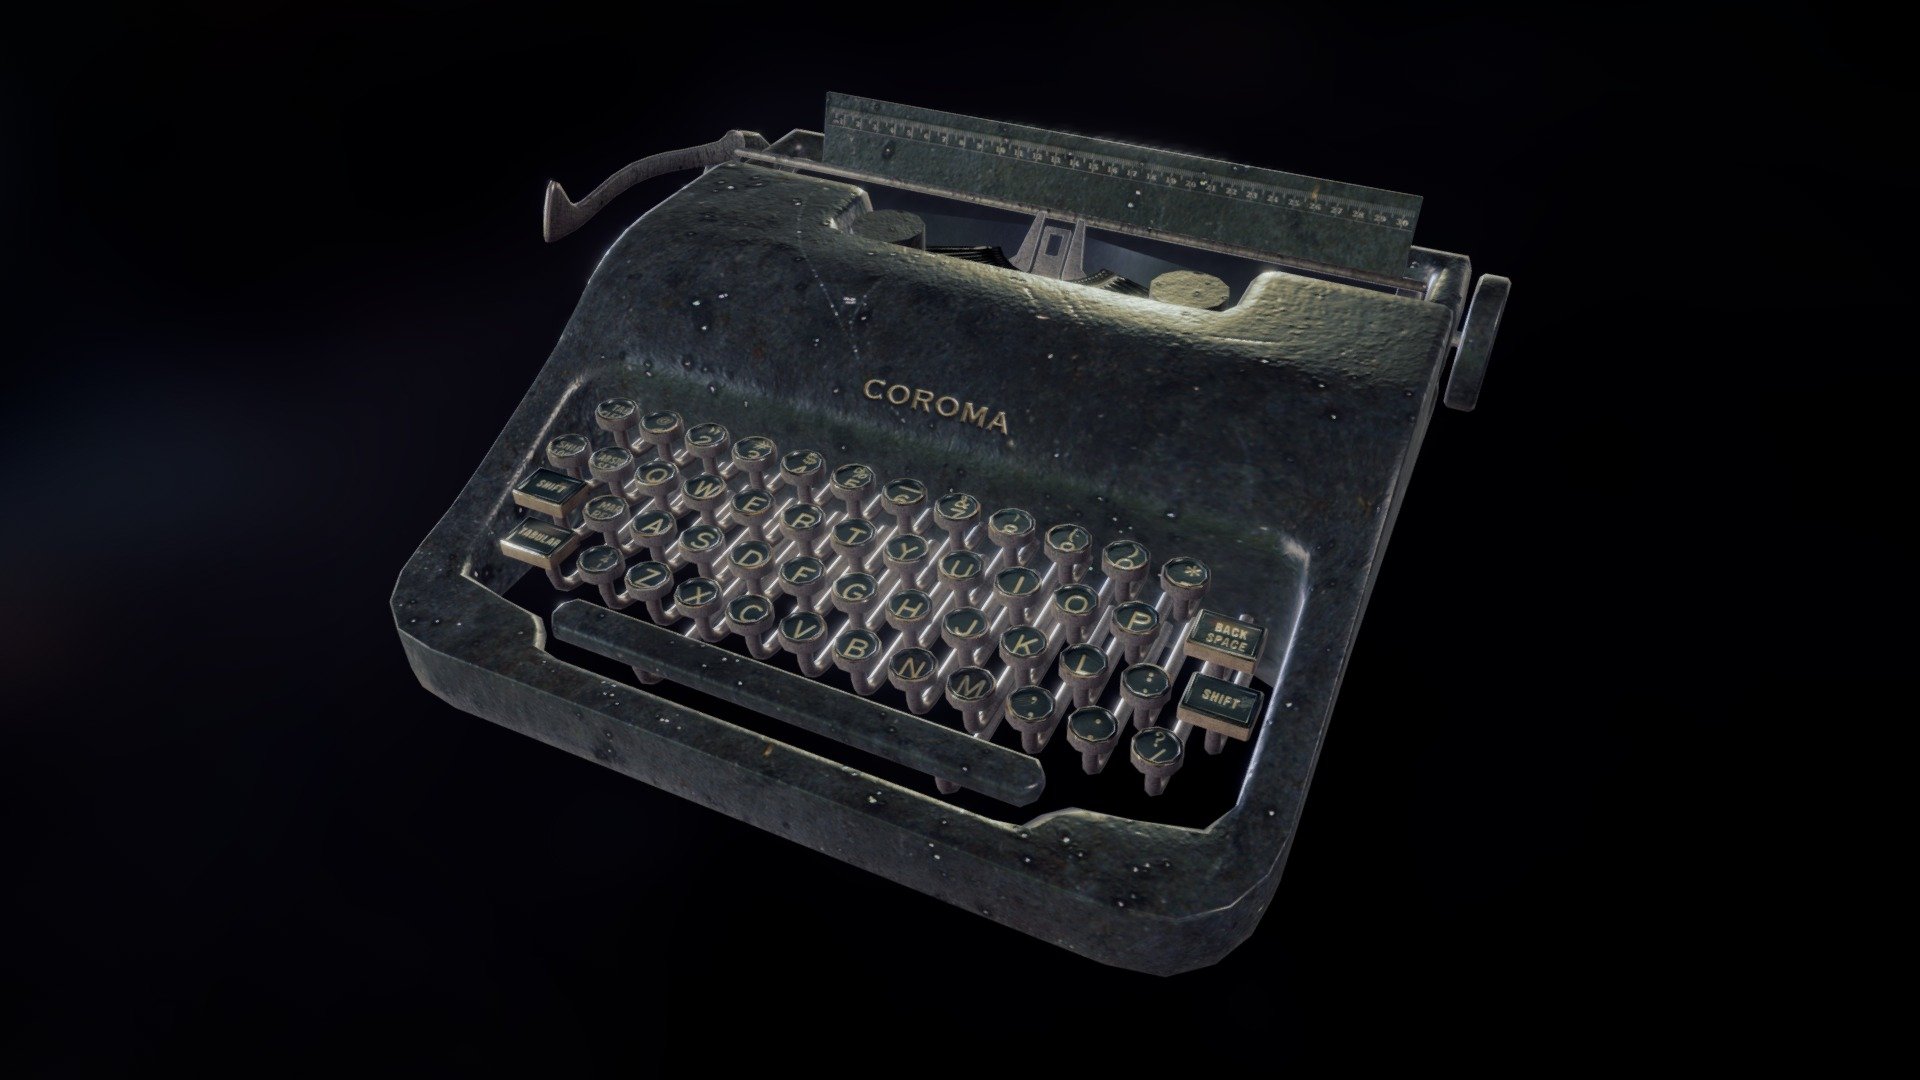 This is an old, weathered typewriter I designed to be game ready. It was made in Maya and Photoshop for Unreal Engine 4 3d model